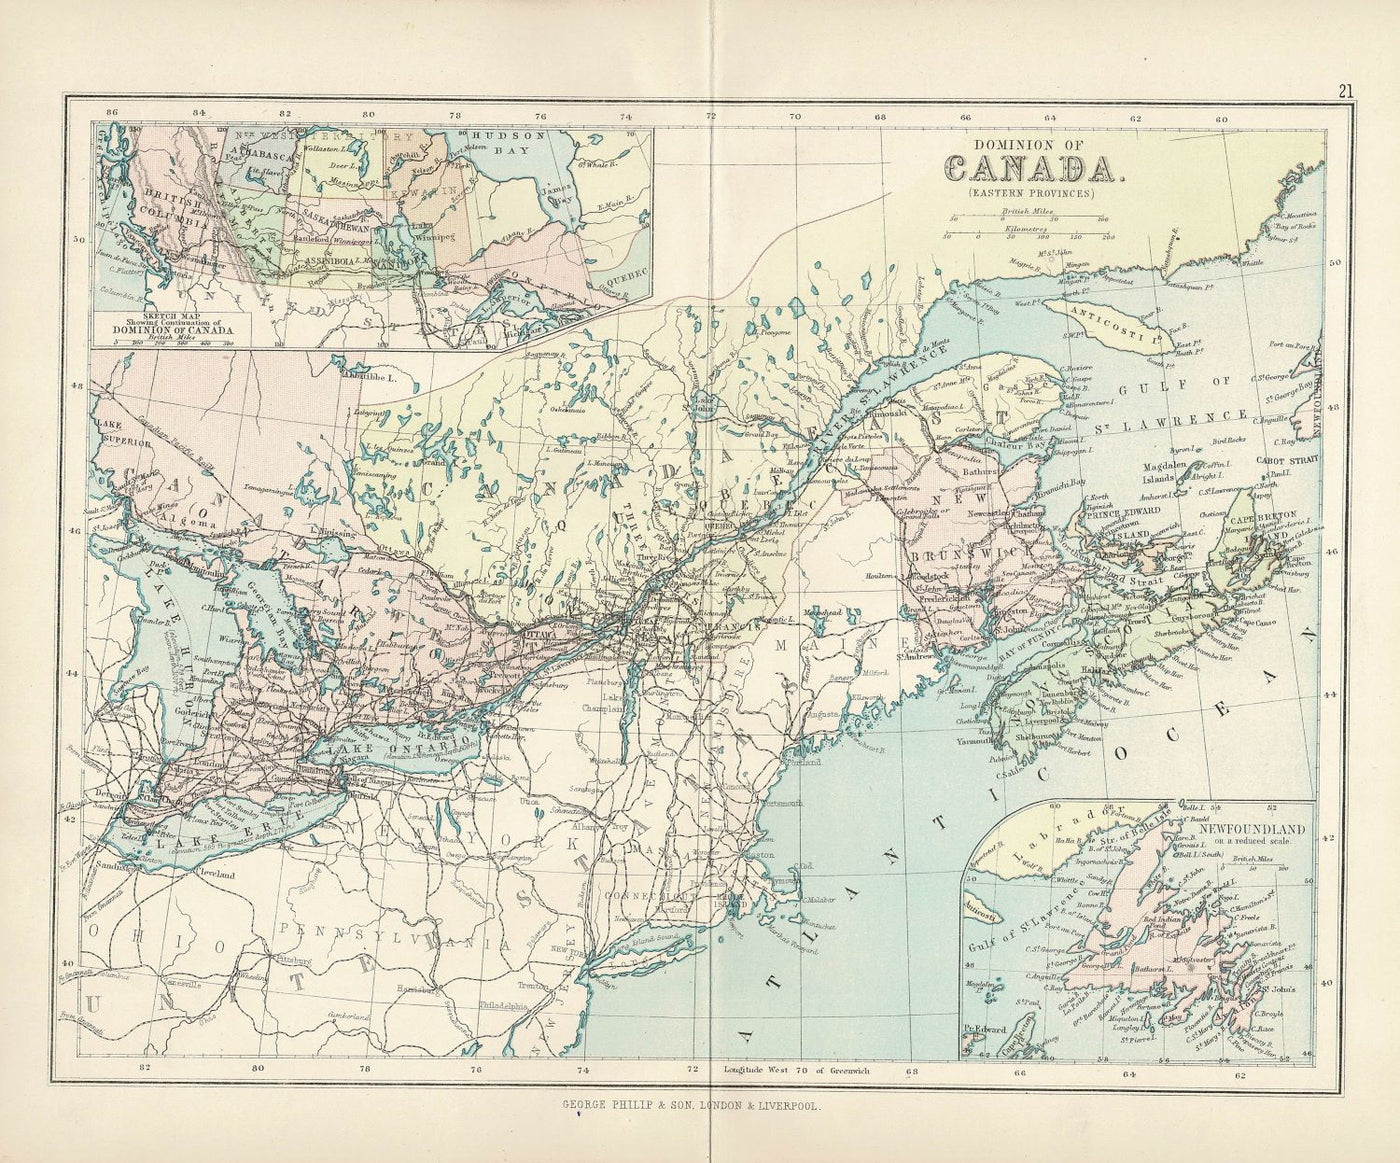 Eastern Canada, Antique Map, 1886